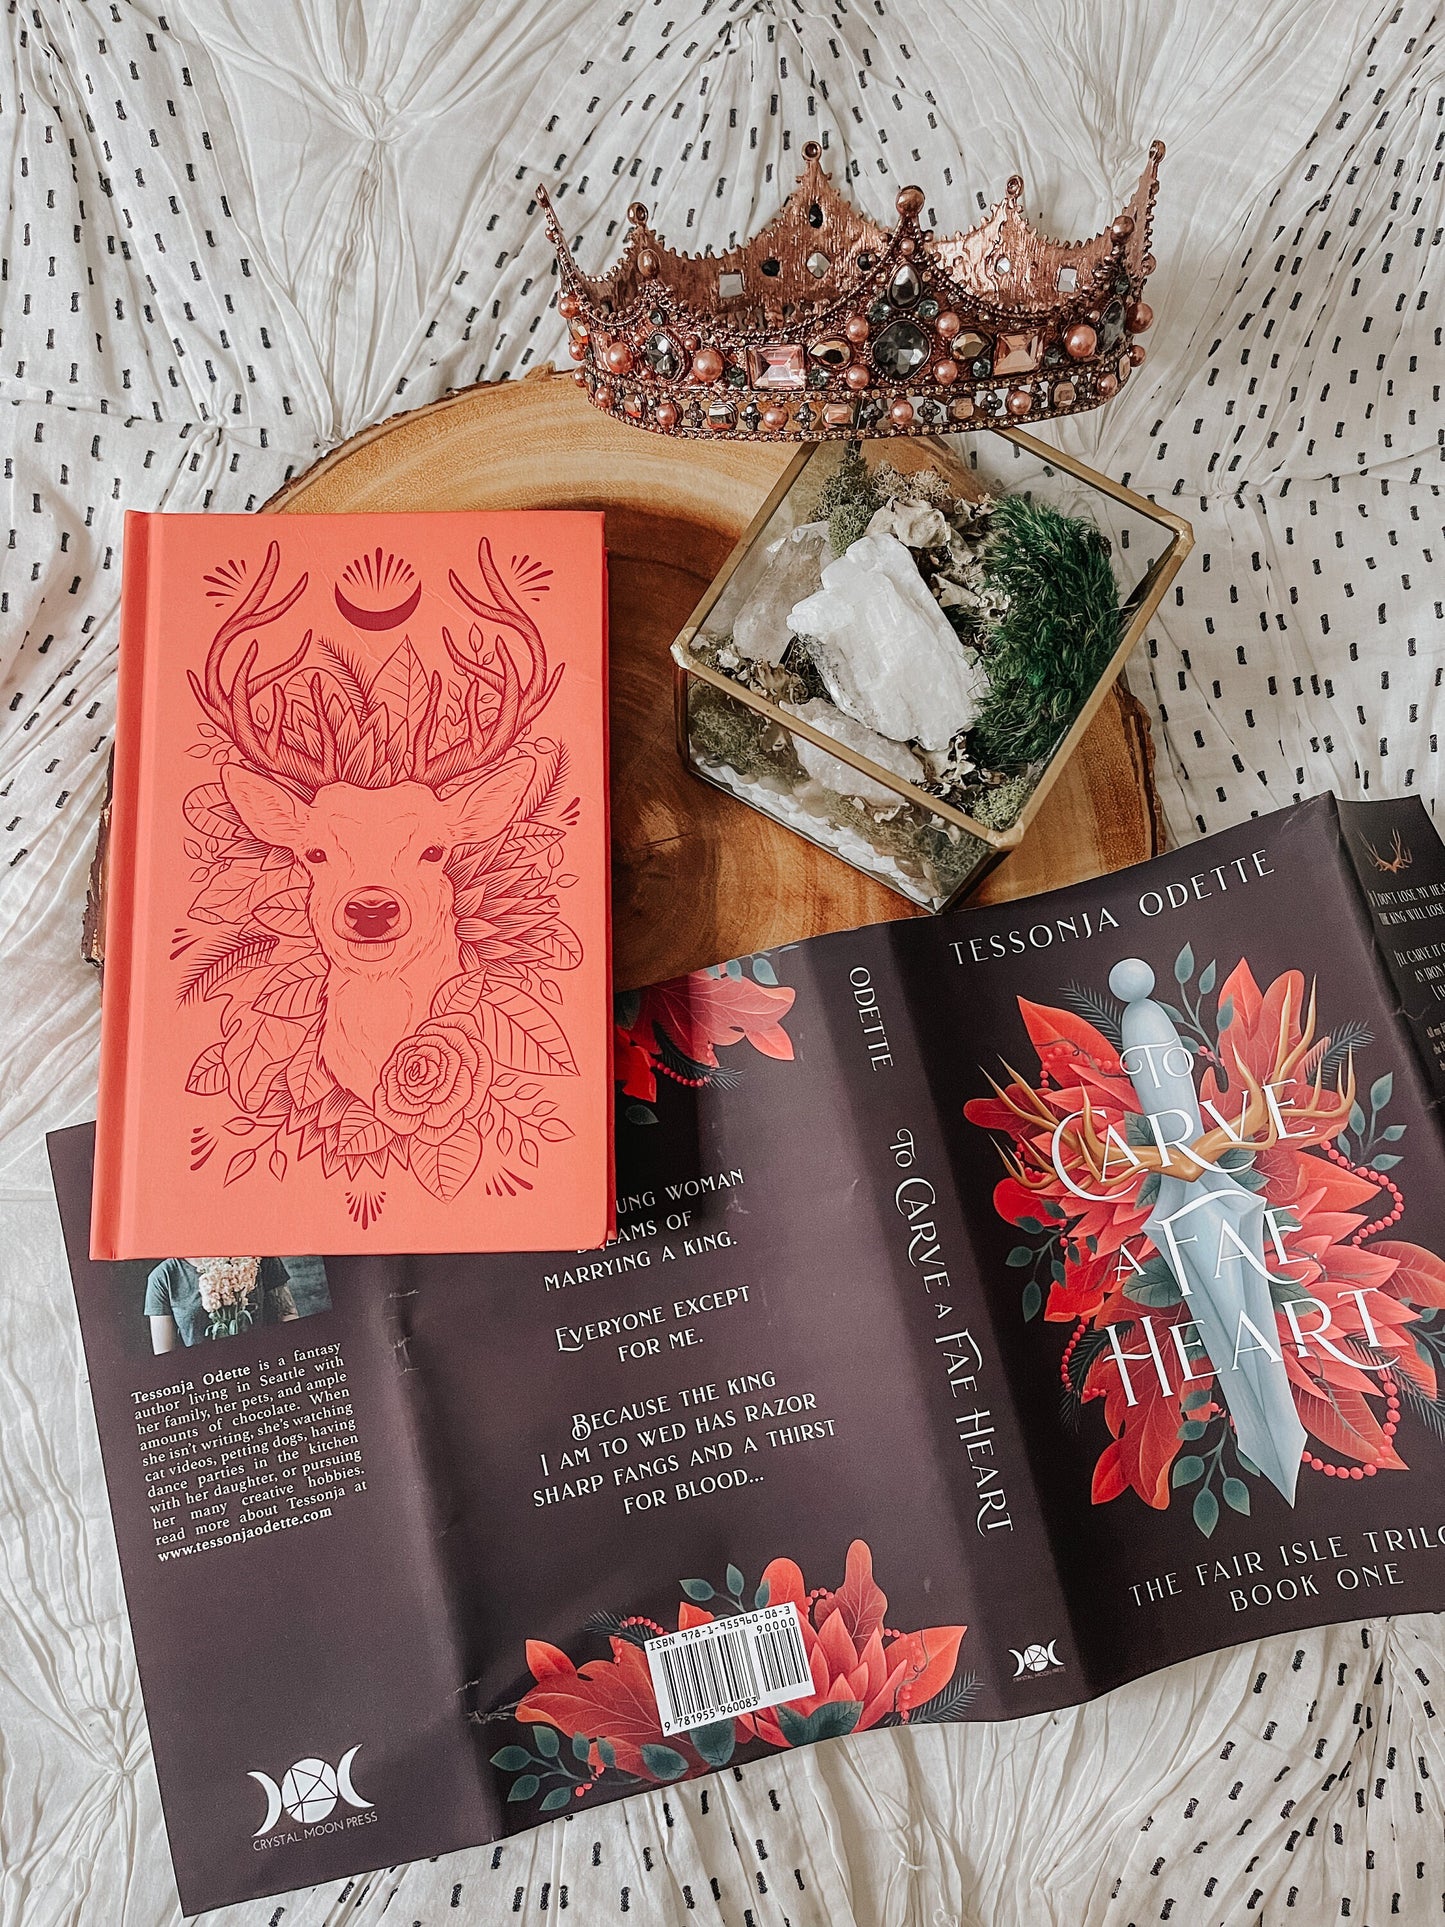 To Carve a Fae Heart (hardcover) signed